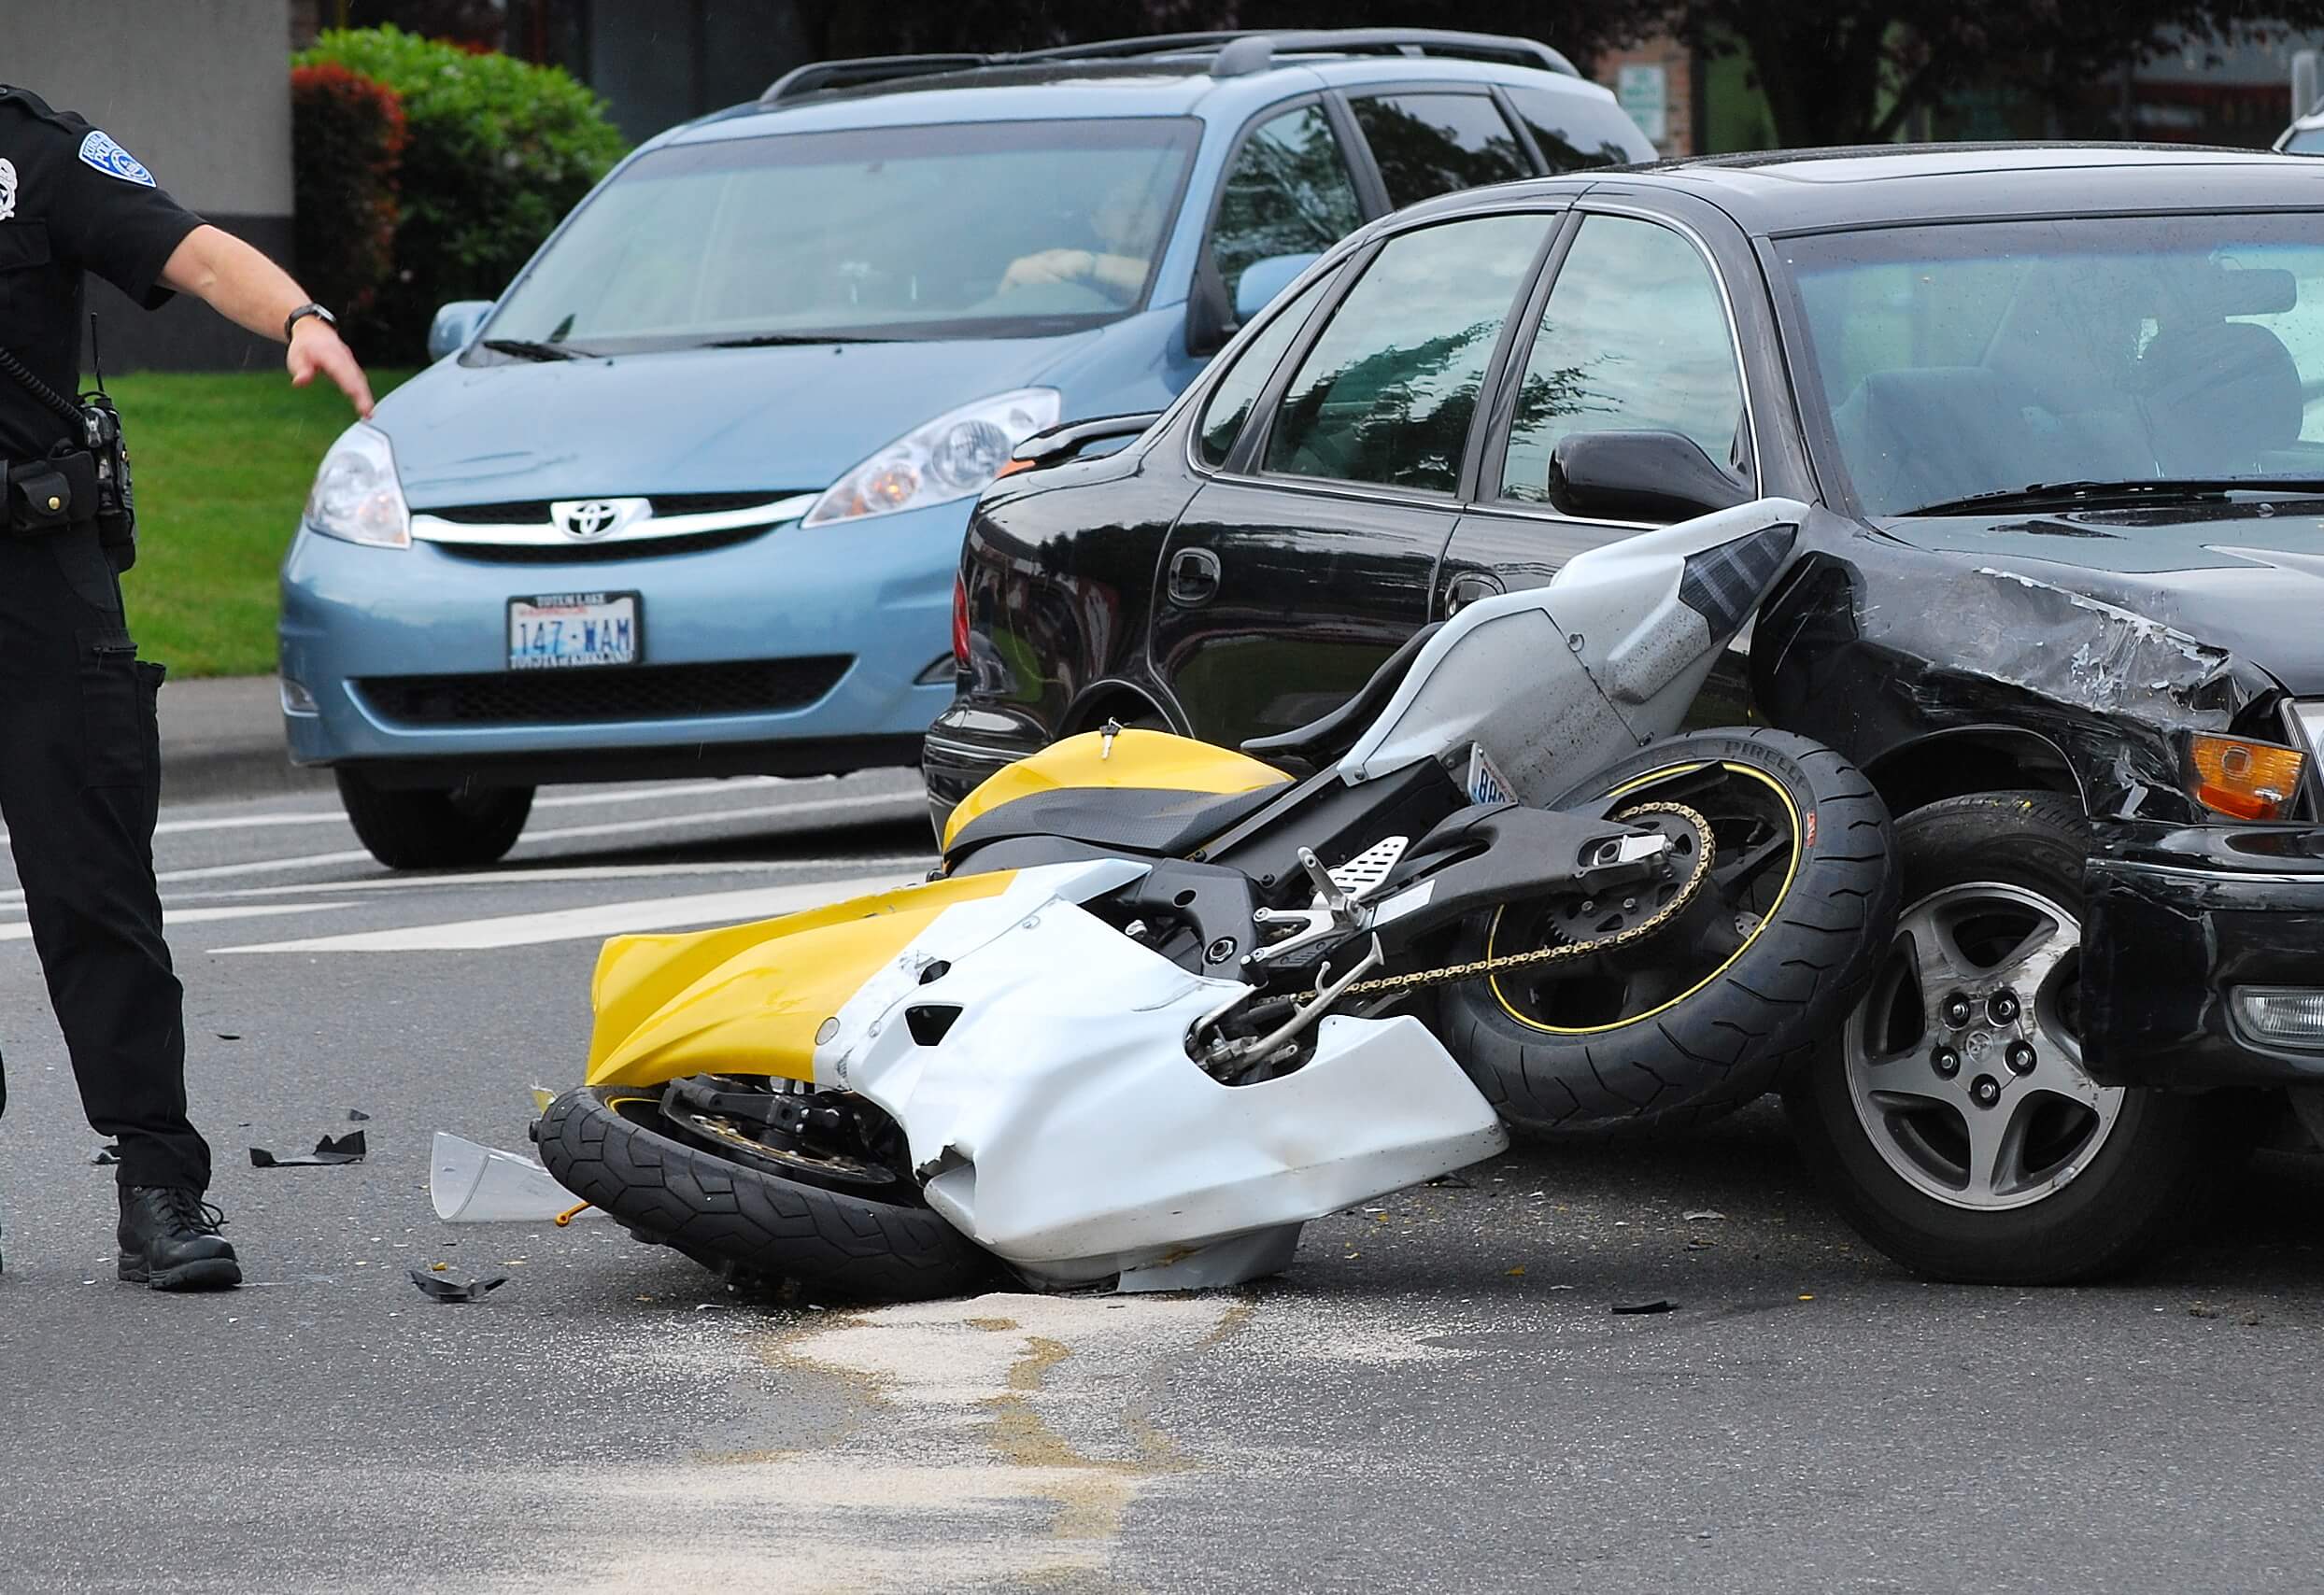 pasadena motorcycle accident lawyer can help with motorcycle accident cases